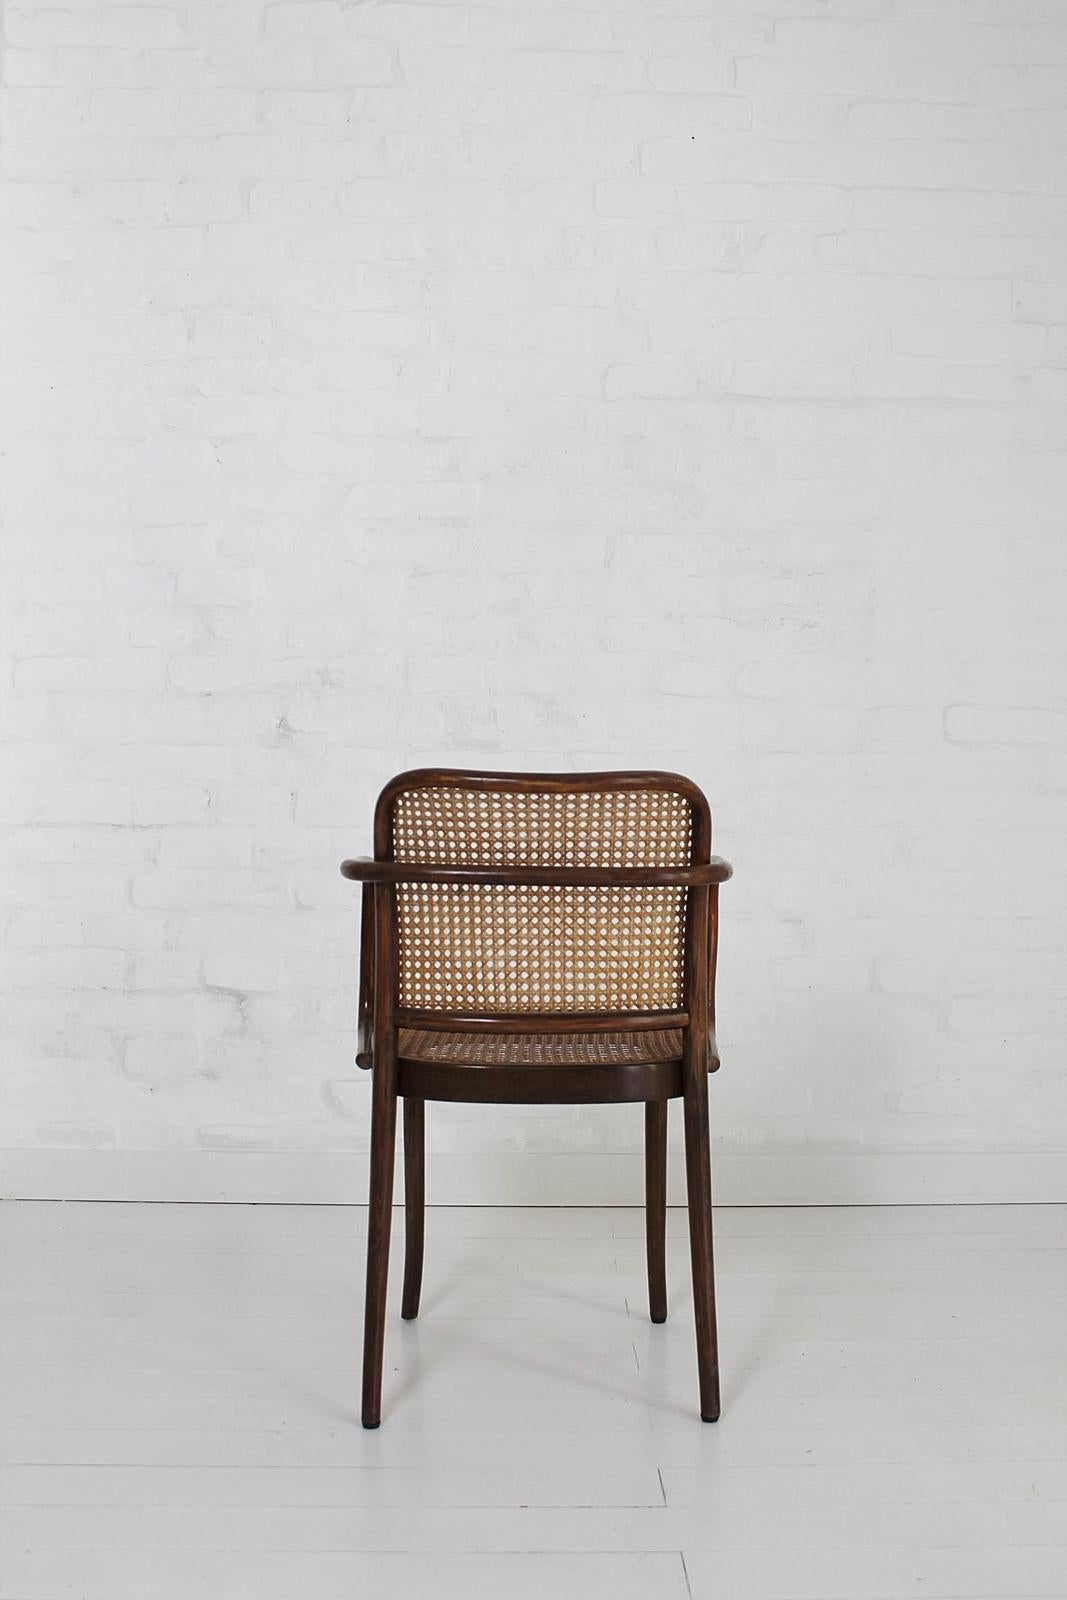 Stained No. 811 Prague Armchair by Josef Hoffman, 1925